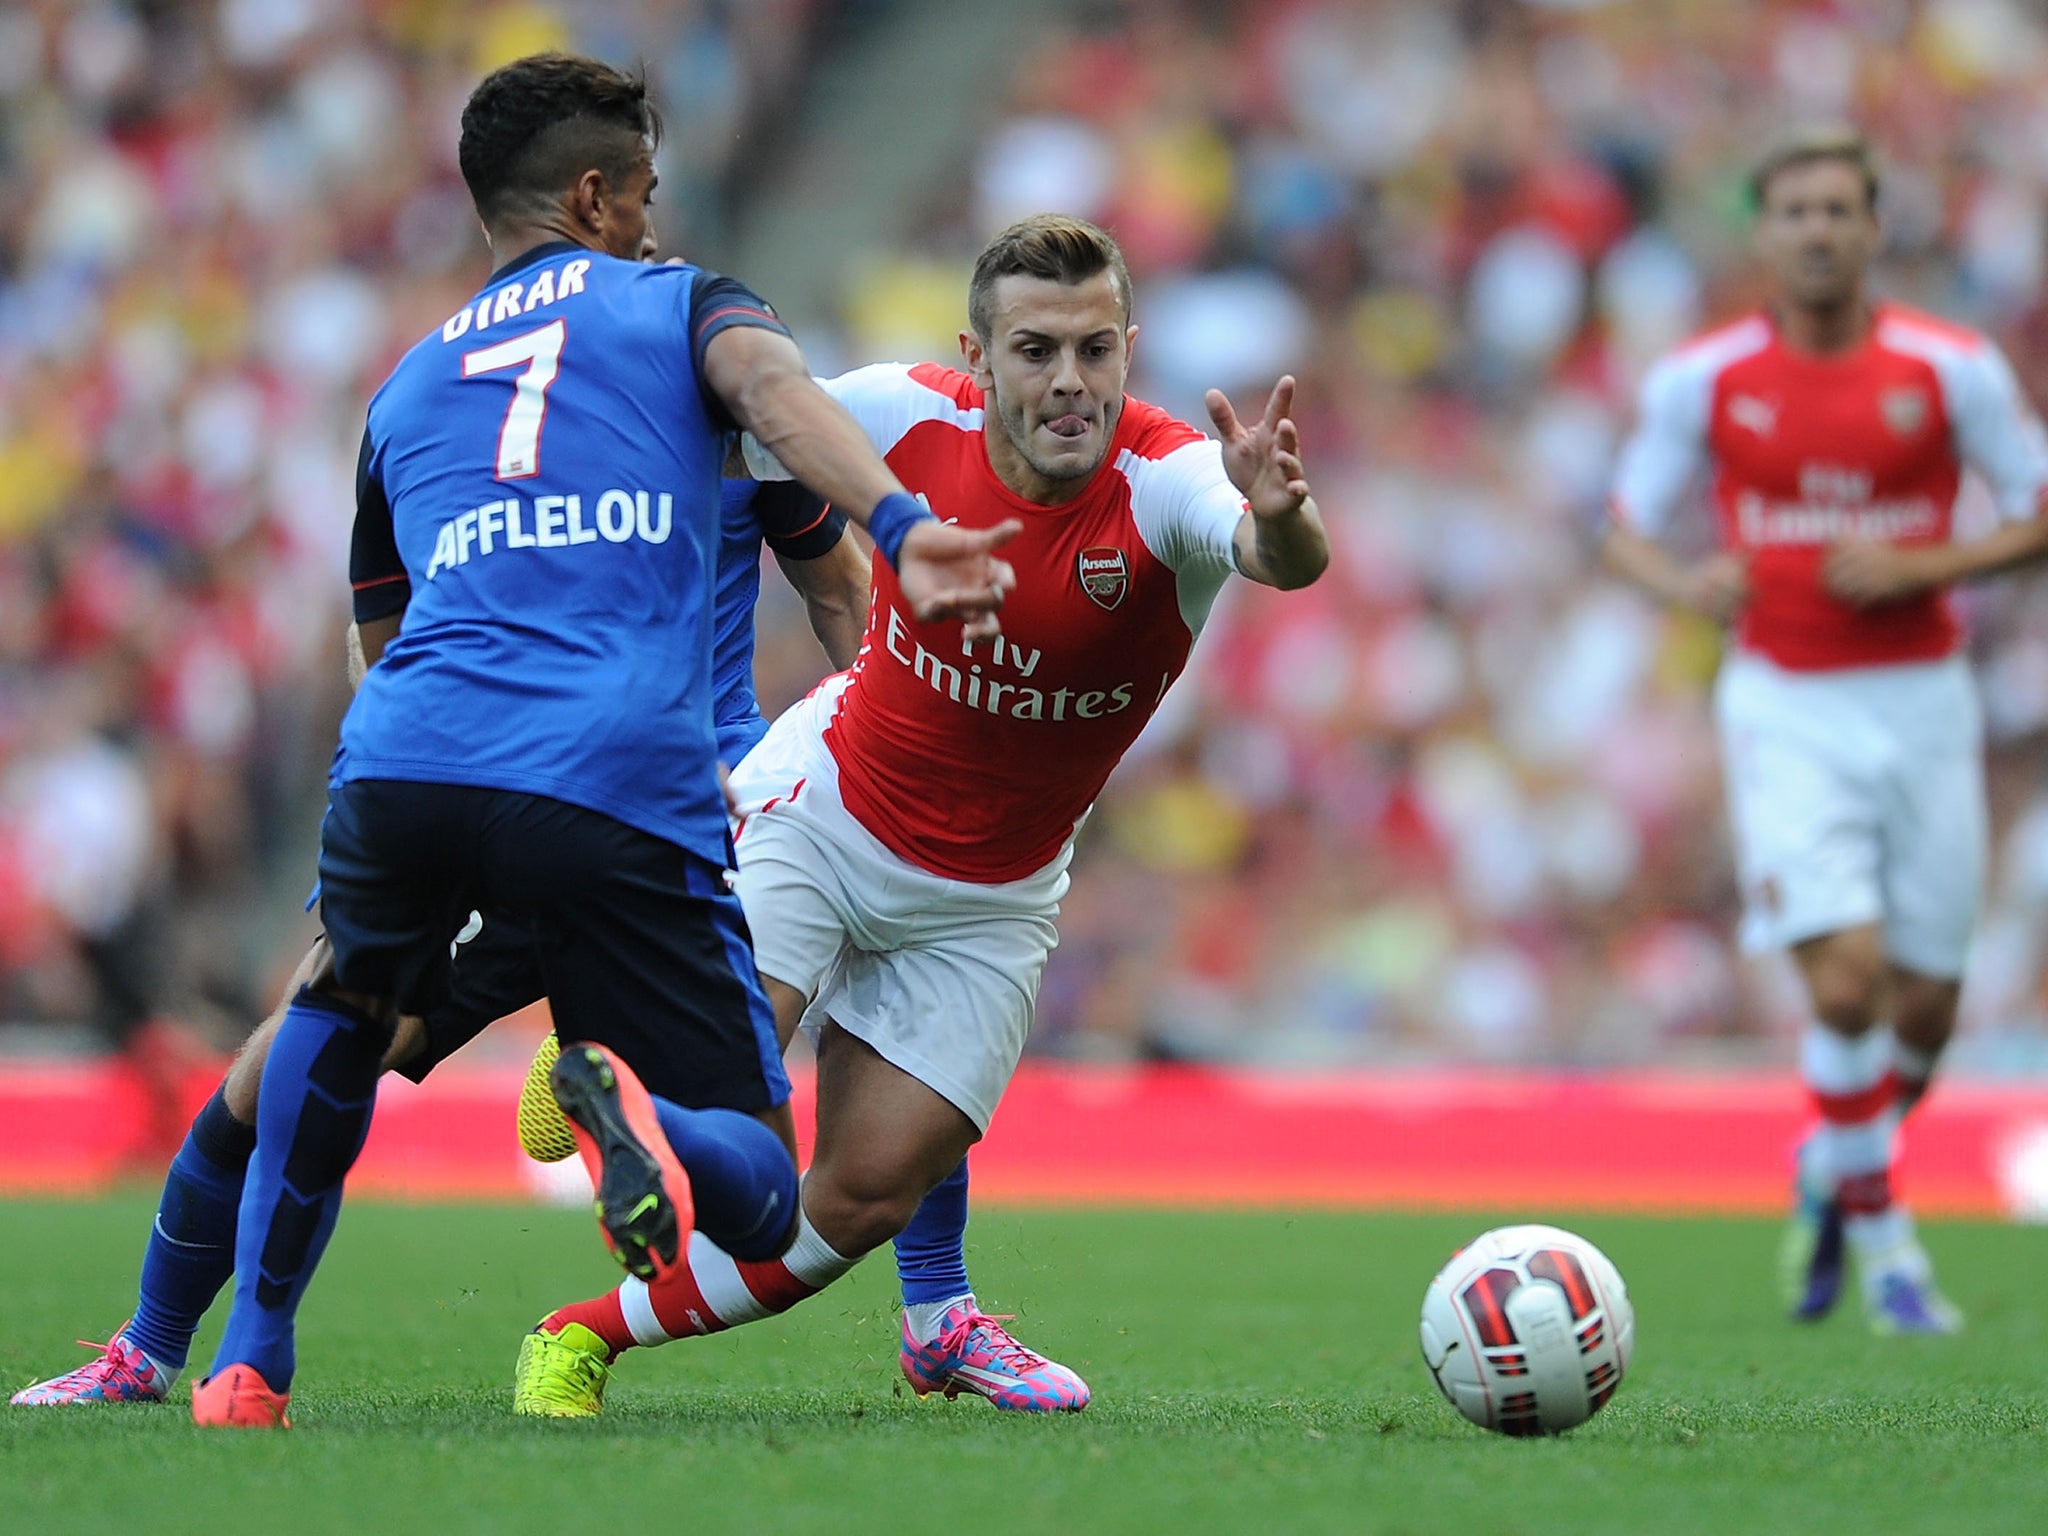 Alex Jack Wilshere of Arsenal takes on Nabil Dirar of AS Monaco during the Emirates Cup.